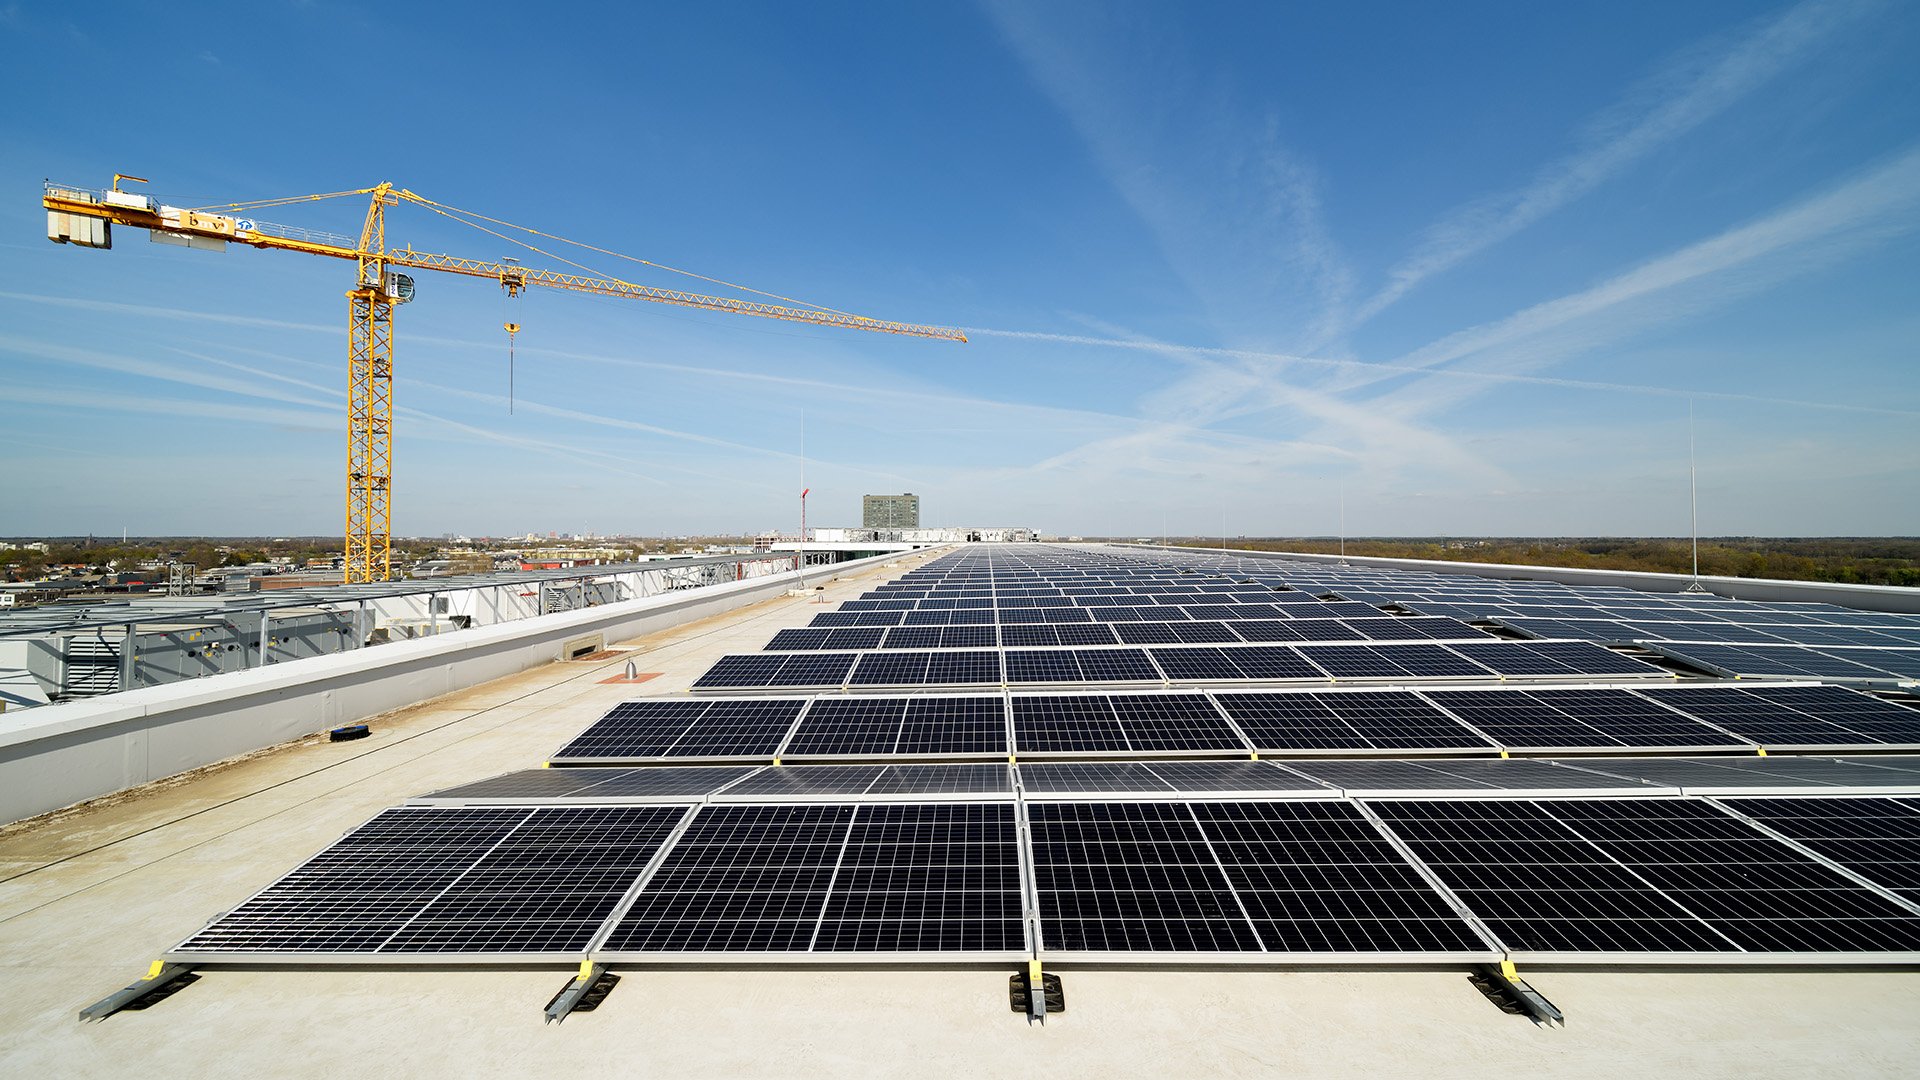 Solar panels covering the roof of an ASML warehouse in Veldhoven, the Netherlands.